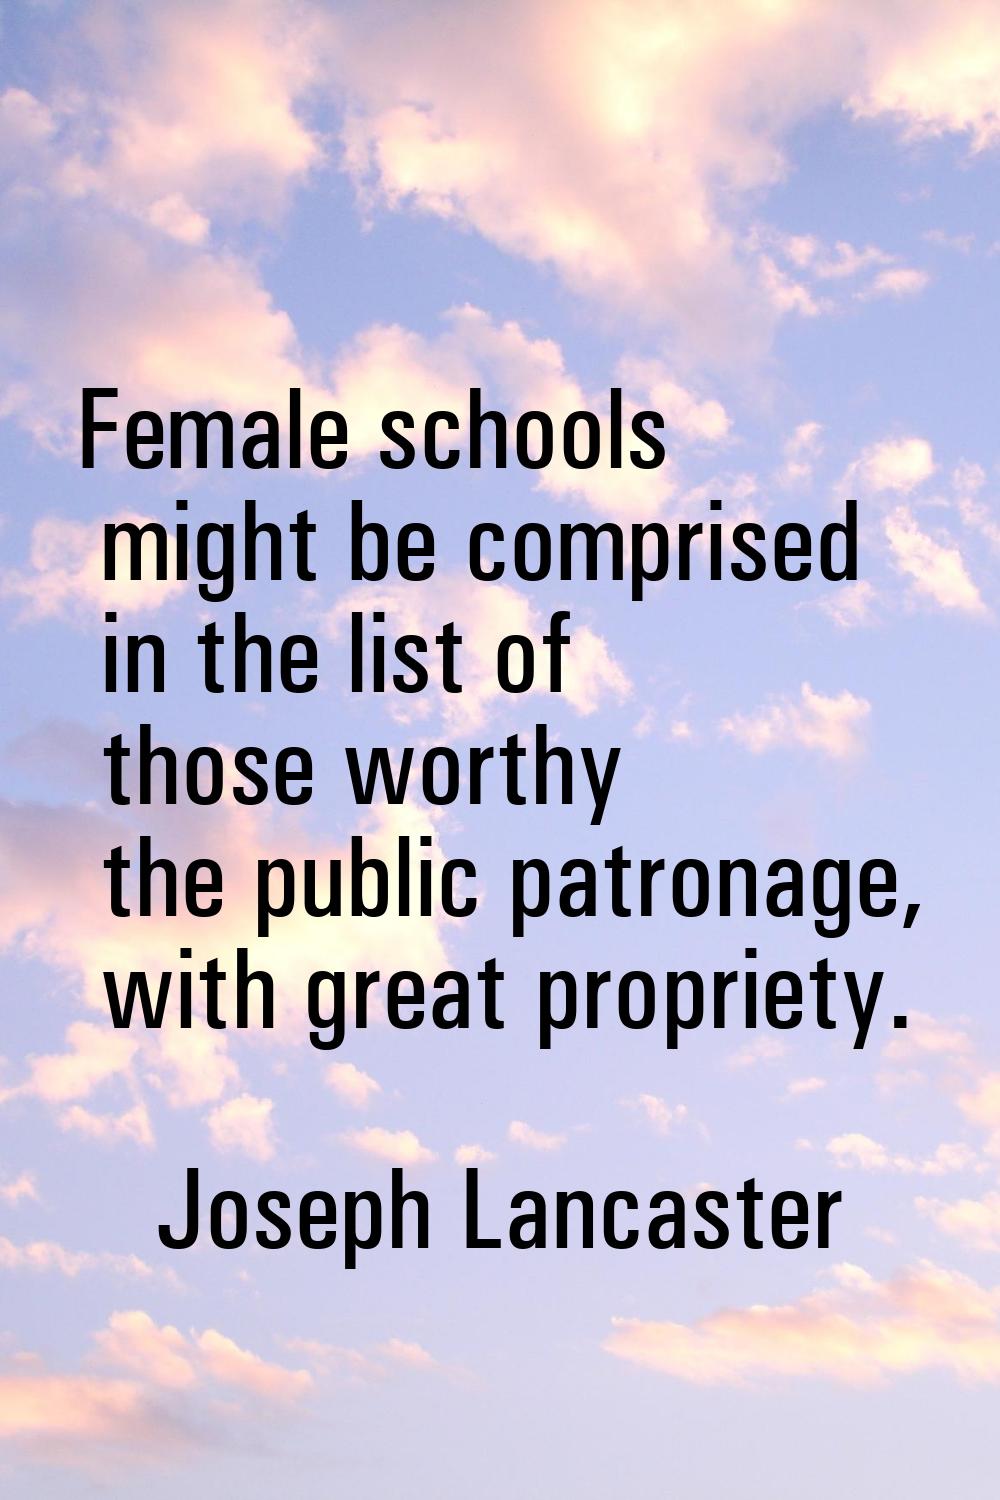 Female schools might be comprised in the list of those worthy the public patronage, with great prop